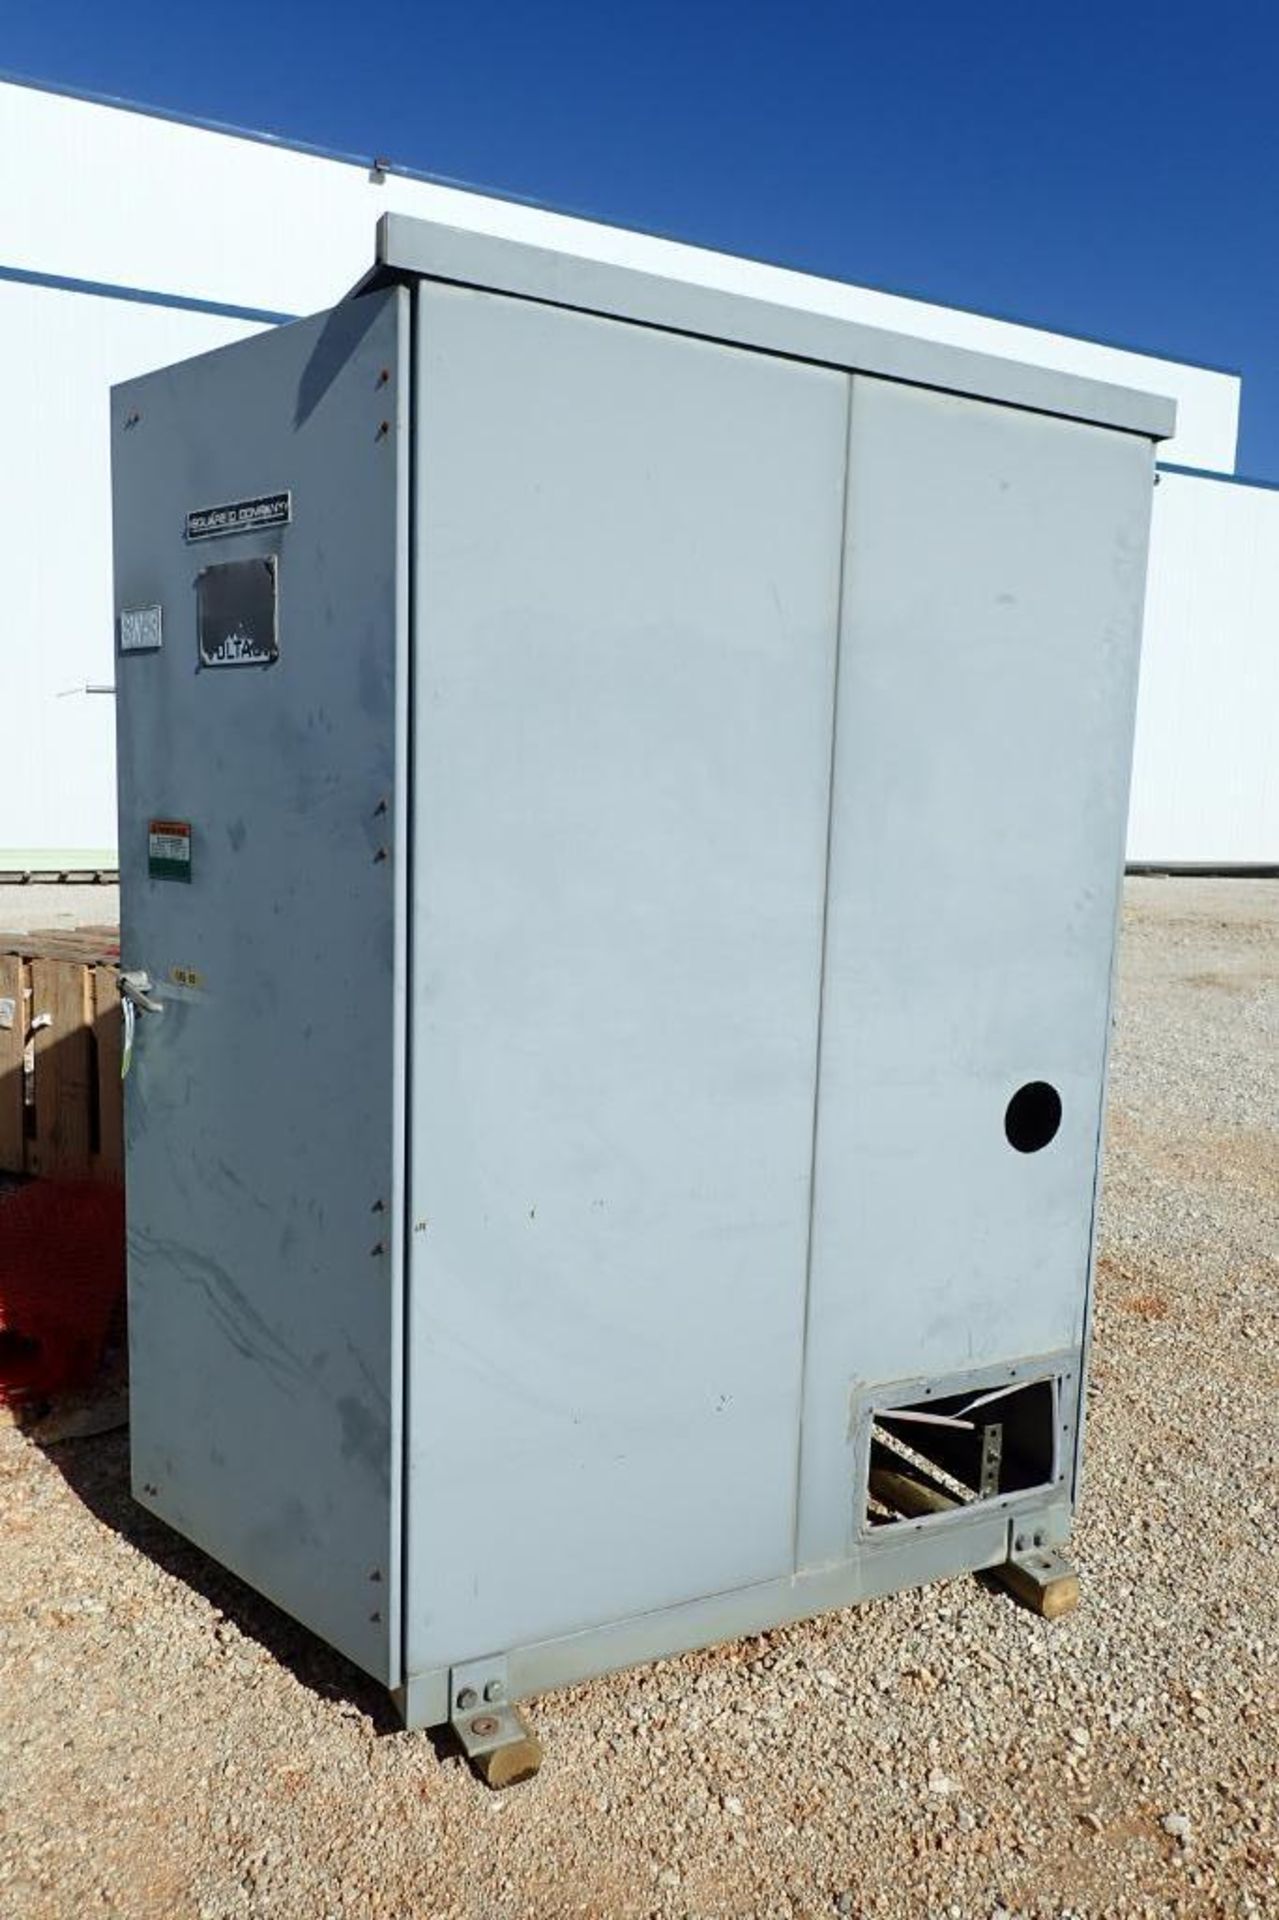 Square D 12,000 volt 3d switch - (Located in Fayetteville, AR)